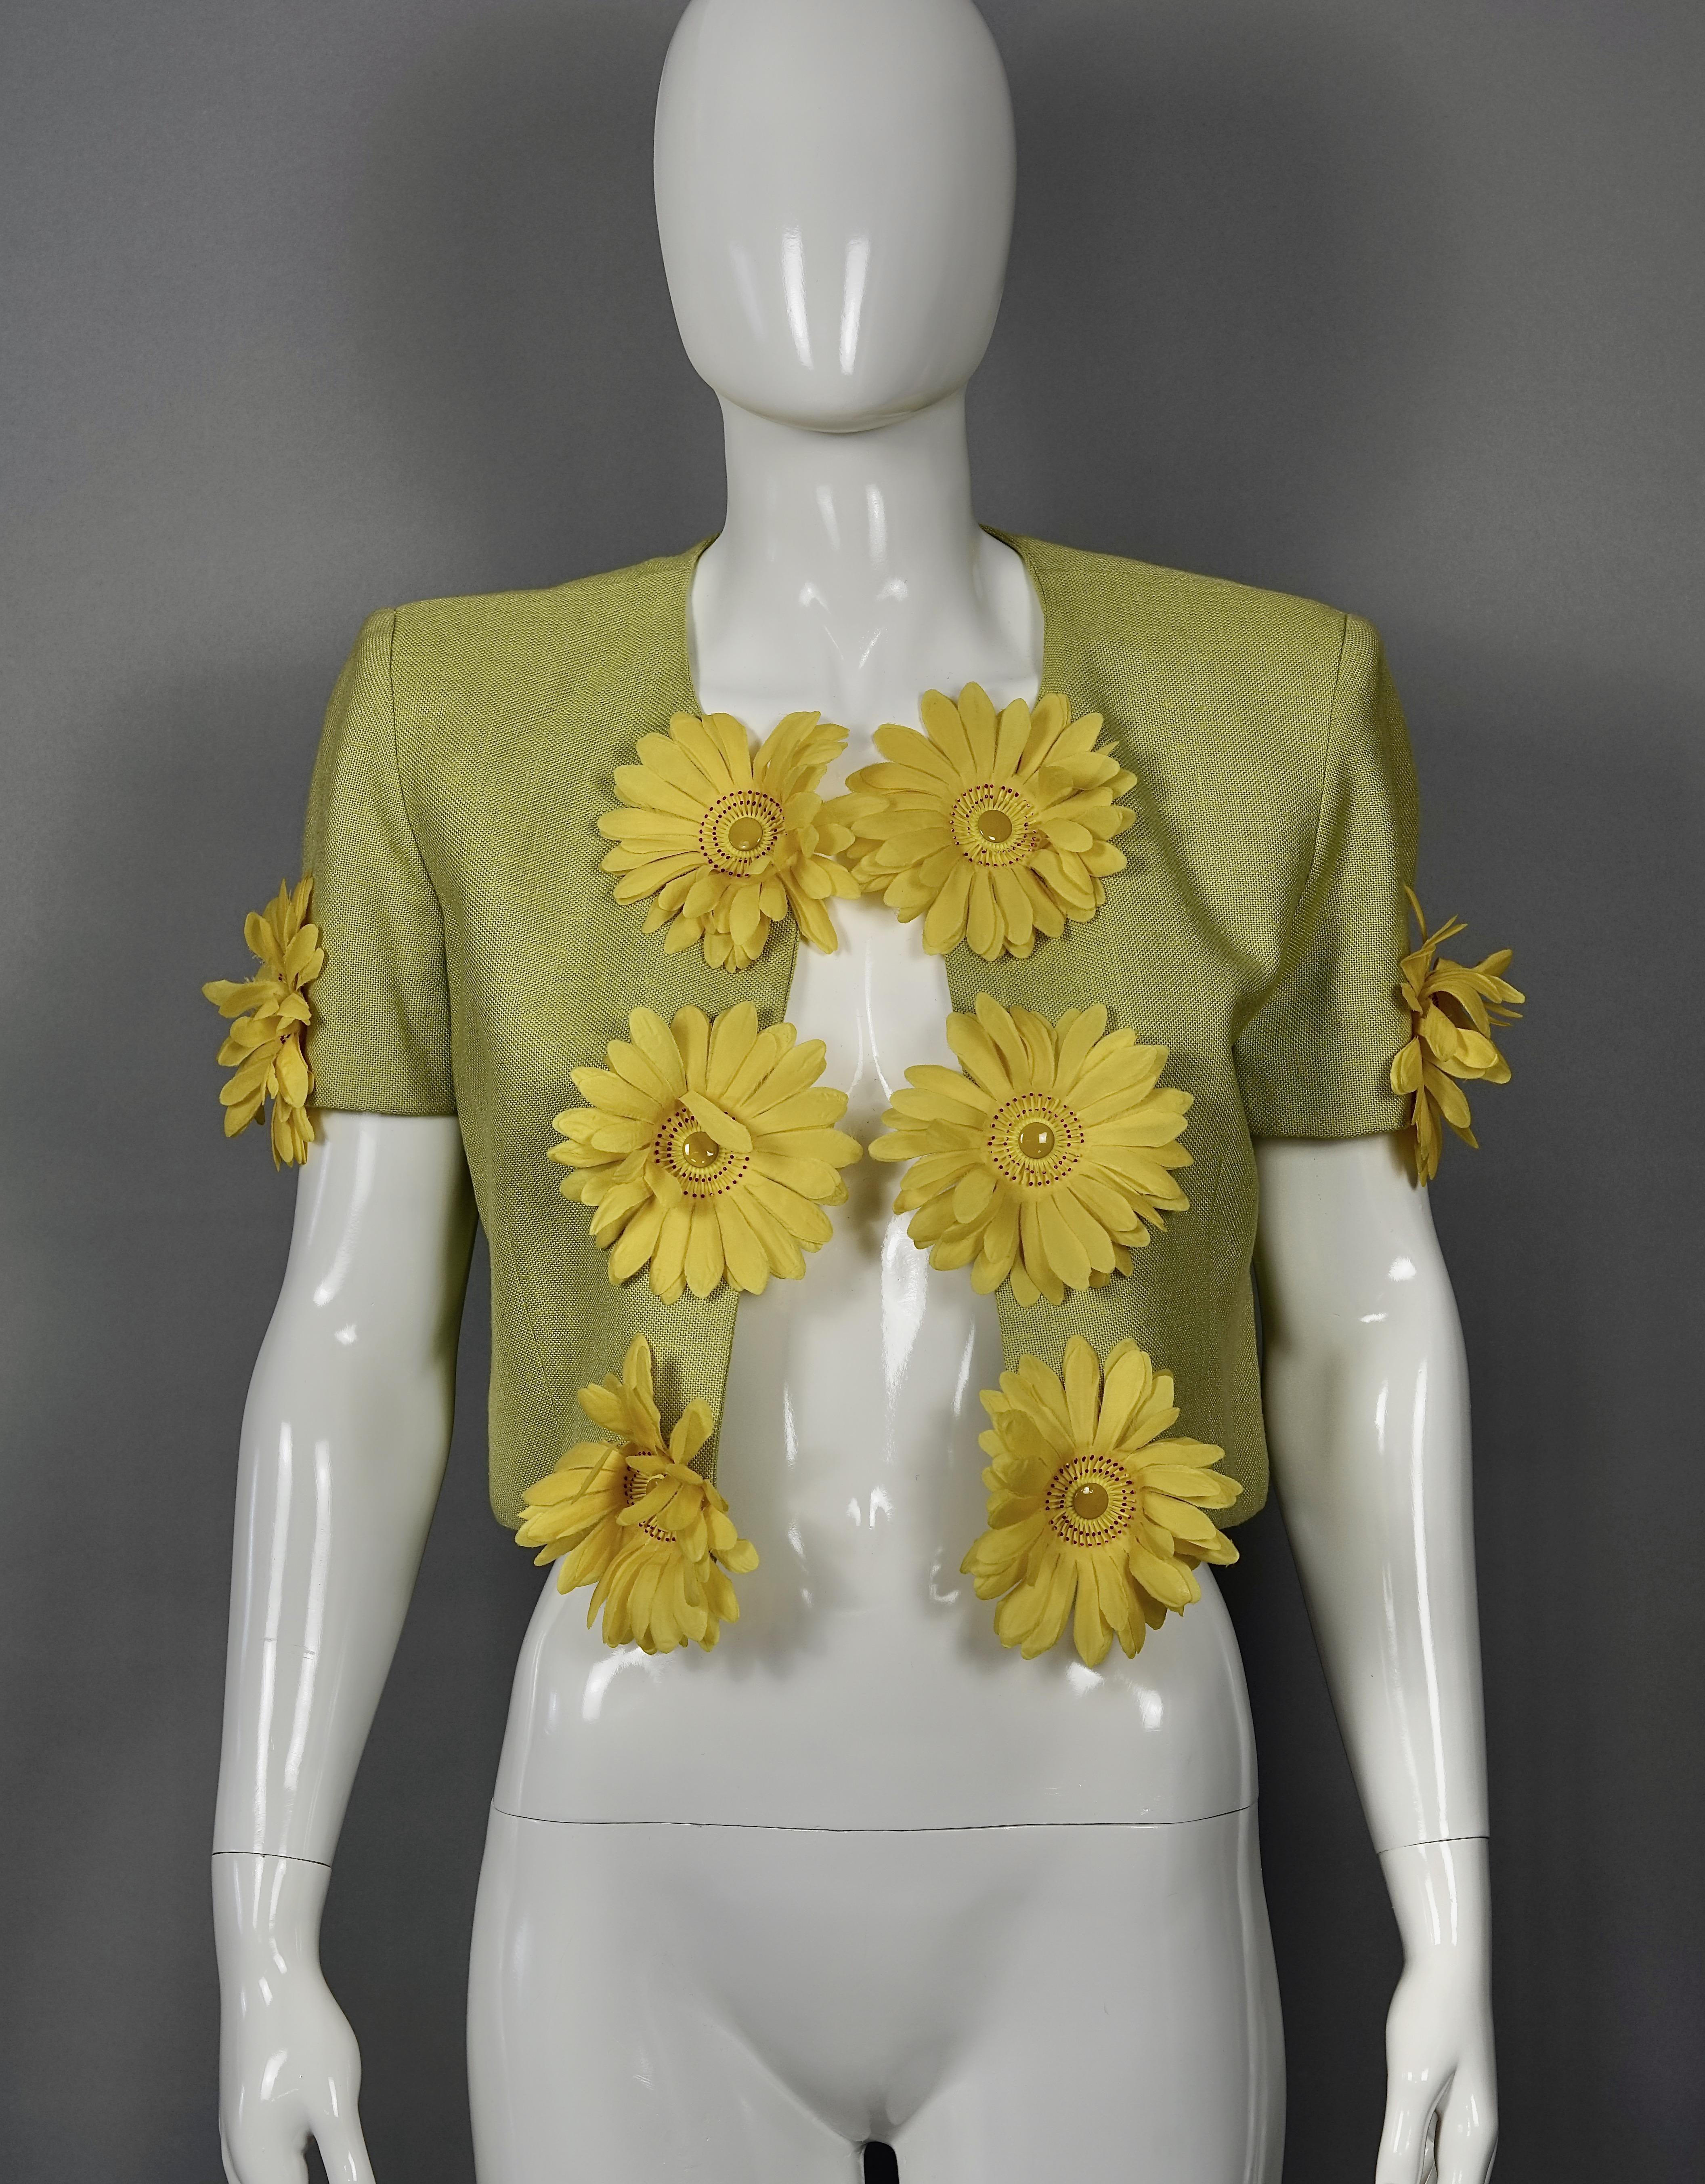 Vintage MOSCHINO CHEAP and CHIC Daisy Flower Novelty Cropped Jacket

Measurements taken laid flat, double bust and waist:
Shoulder: 16.14 inches (41 cm)
Sleeves: 8.26 inches (21 cm)
Bust: 18.50 inches (47 cm)
Waist: 16.14 inches (41 cm)
Length: